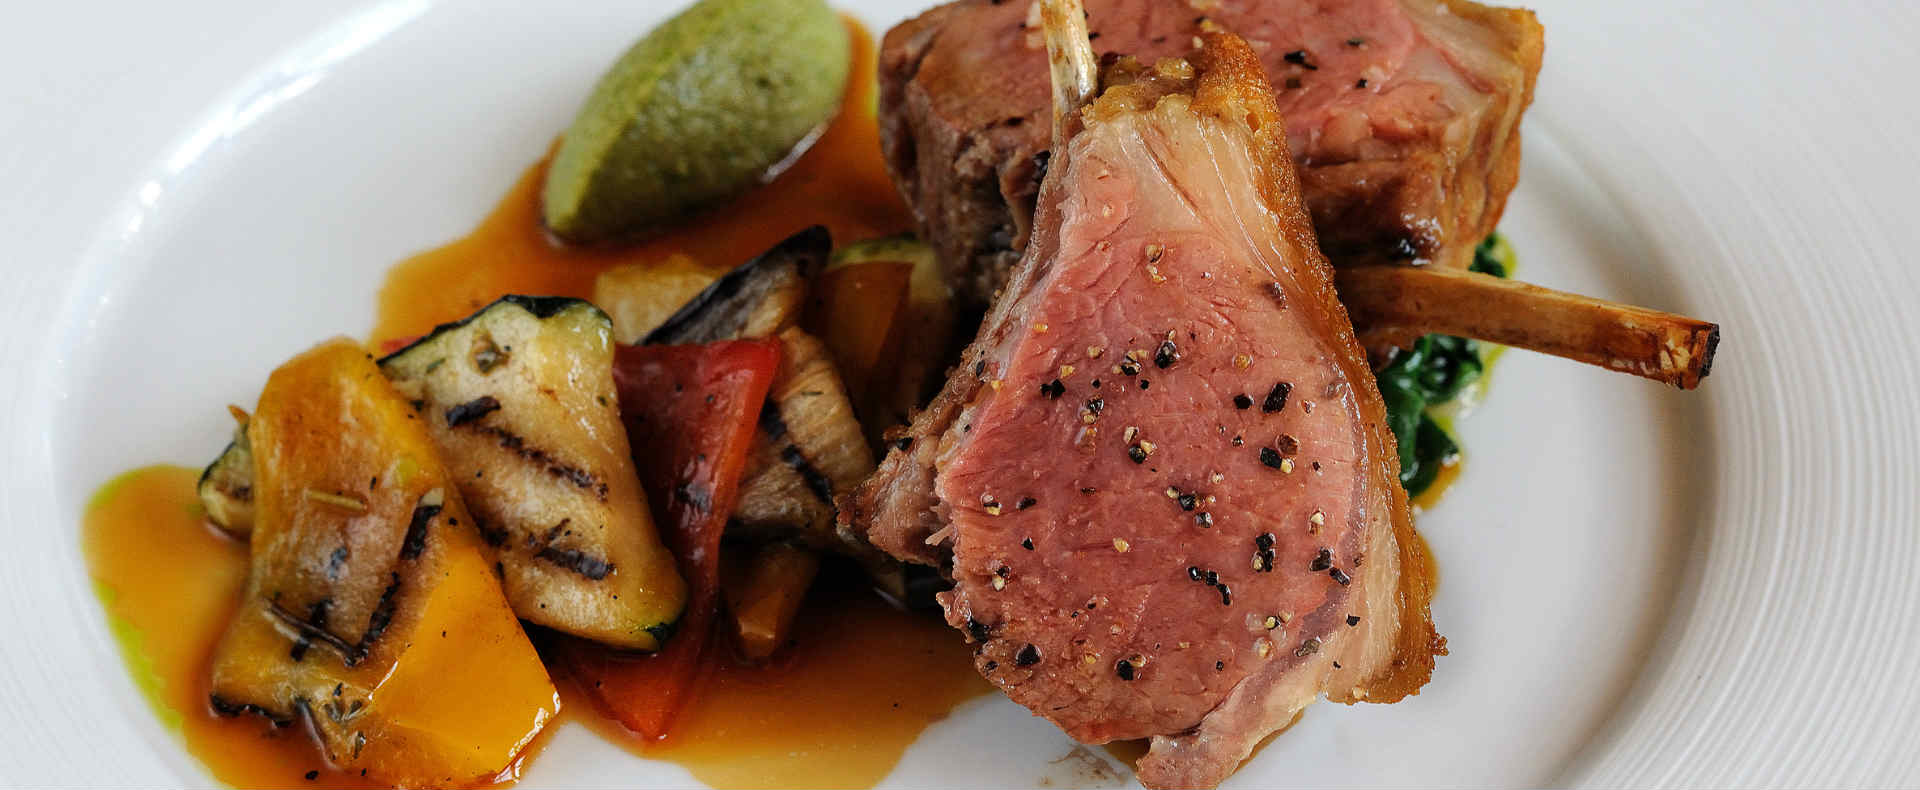 Crusted Rack Of Lamb | Montagu Arms Hotel